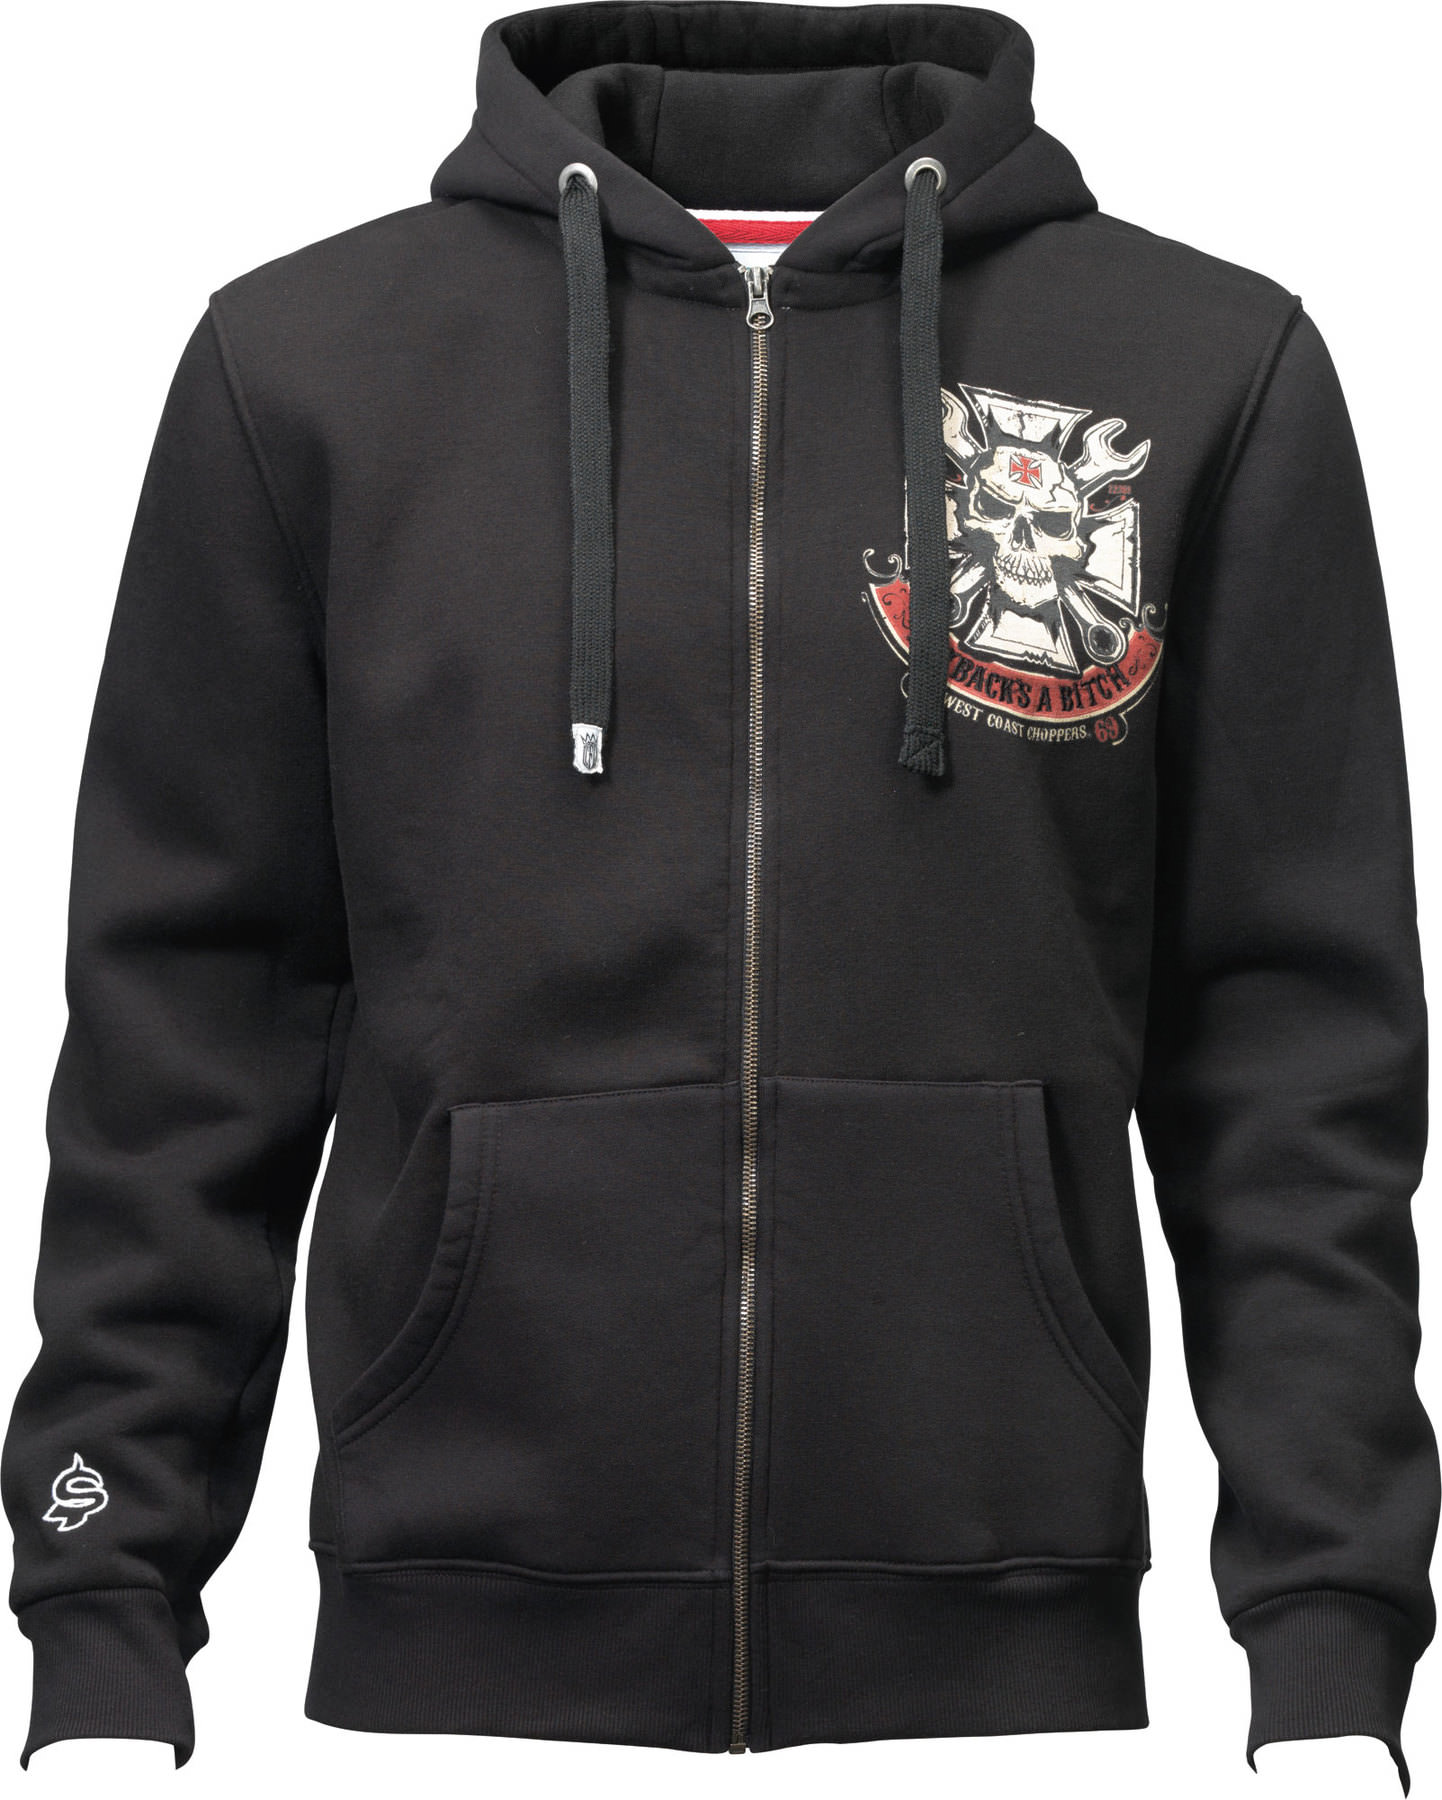 Buy WCC Mechanic Zip-Hoodie | Louis motorcycle clothing and technology